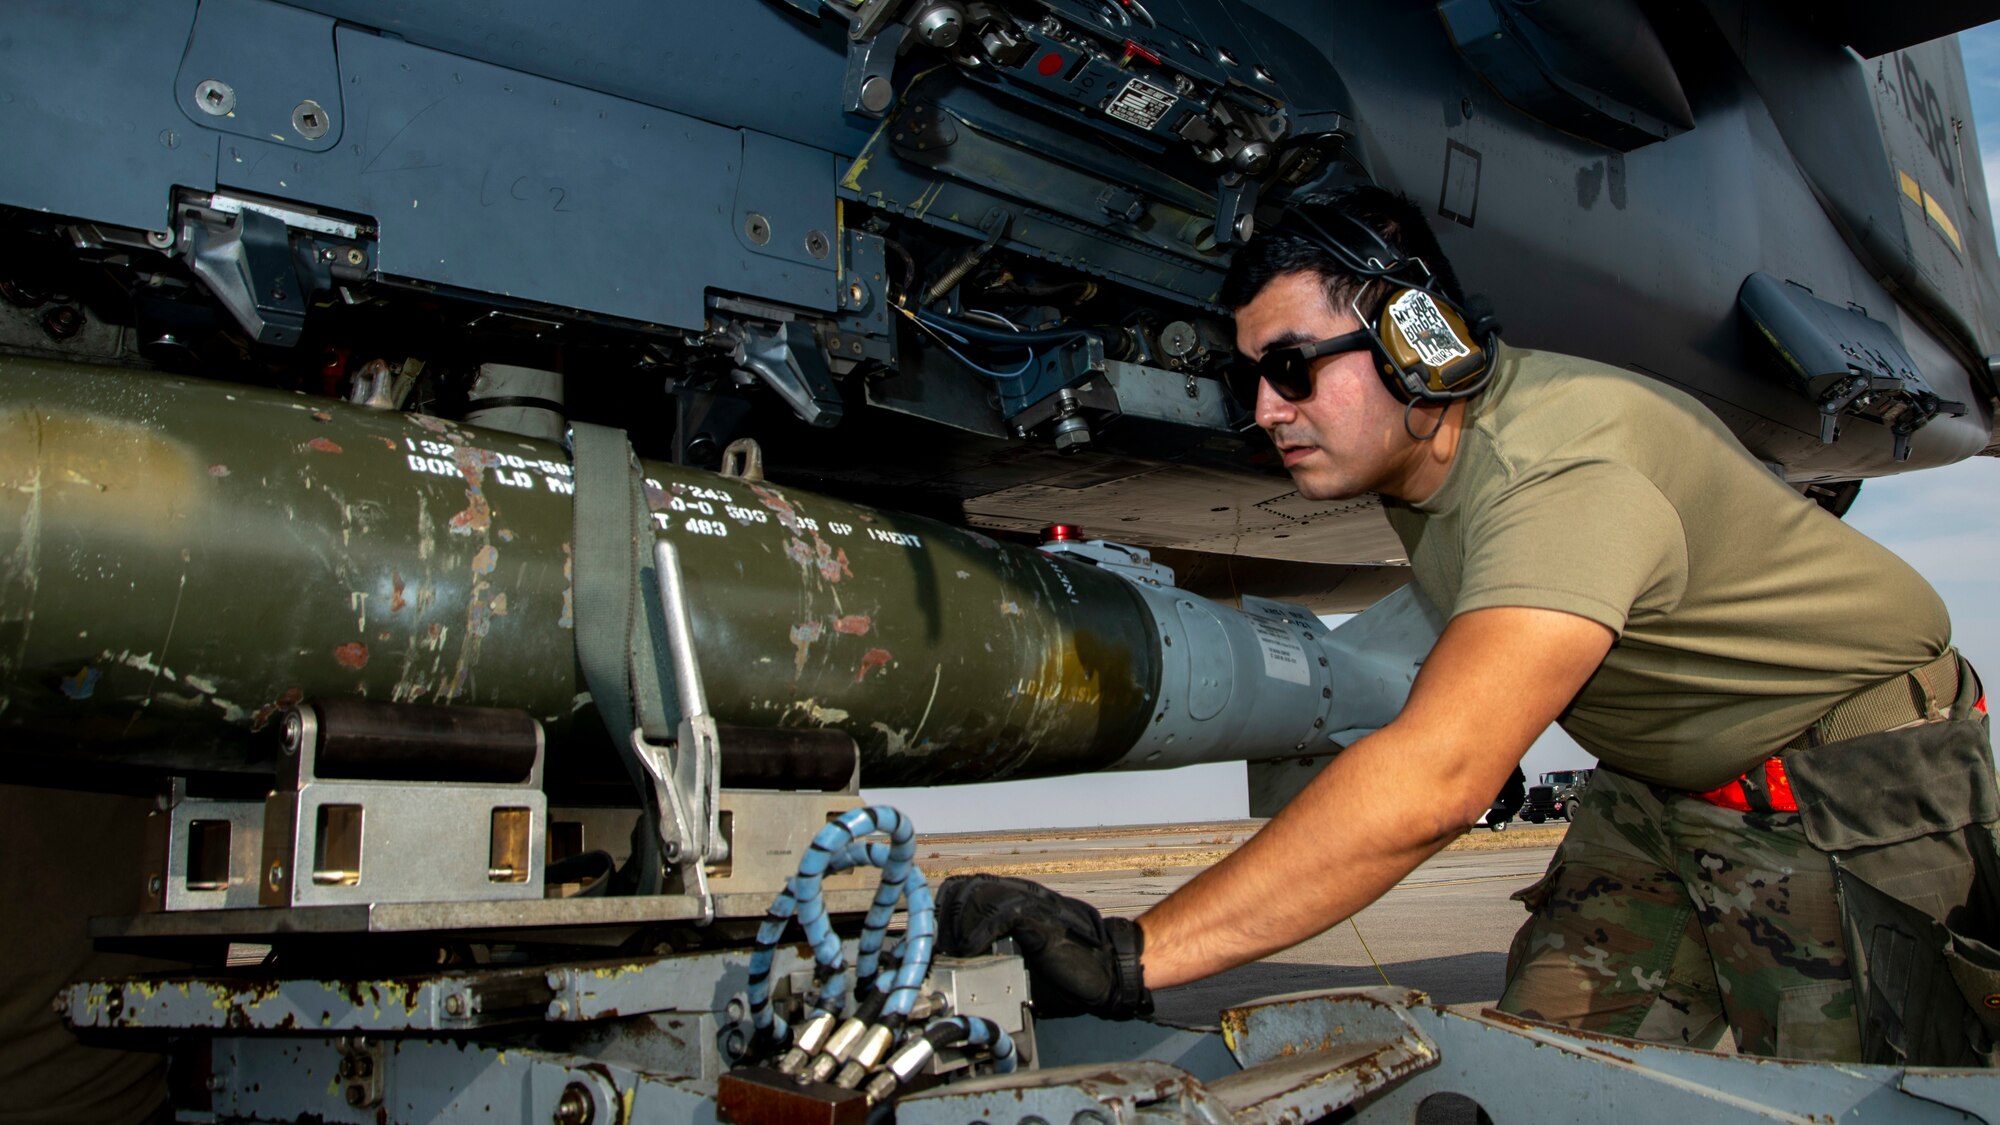 Staff Sgt. Anthony Alonzo, 389th Fighter Squadron weapons load crew member, loads a munition onto an F-15E Strike Eagle bomb rack during an Integrated Combat Turn exercise at Mountain Home Air Force Base, Idaho, Oct. 7, 2020. ICTs are a rapid re-arming and refueling practice where both fuels and weapons troops work side-by-side to turn aircraft around and get them back into the skies. (U.S. Air Force photo by Senior Airman JaNae Capuno)